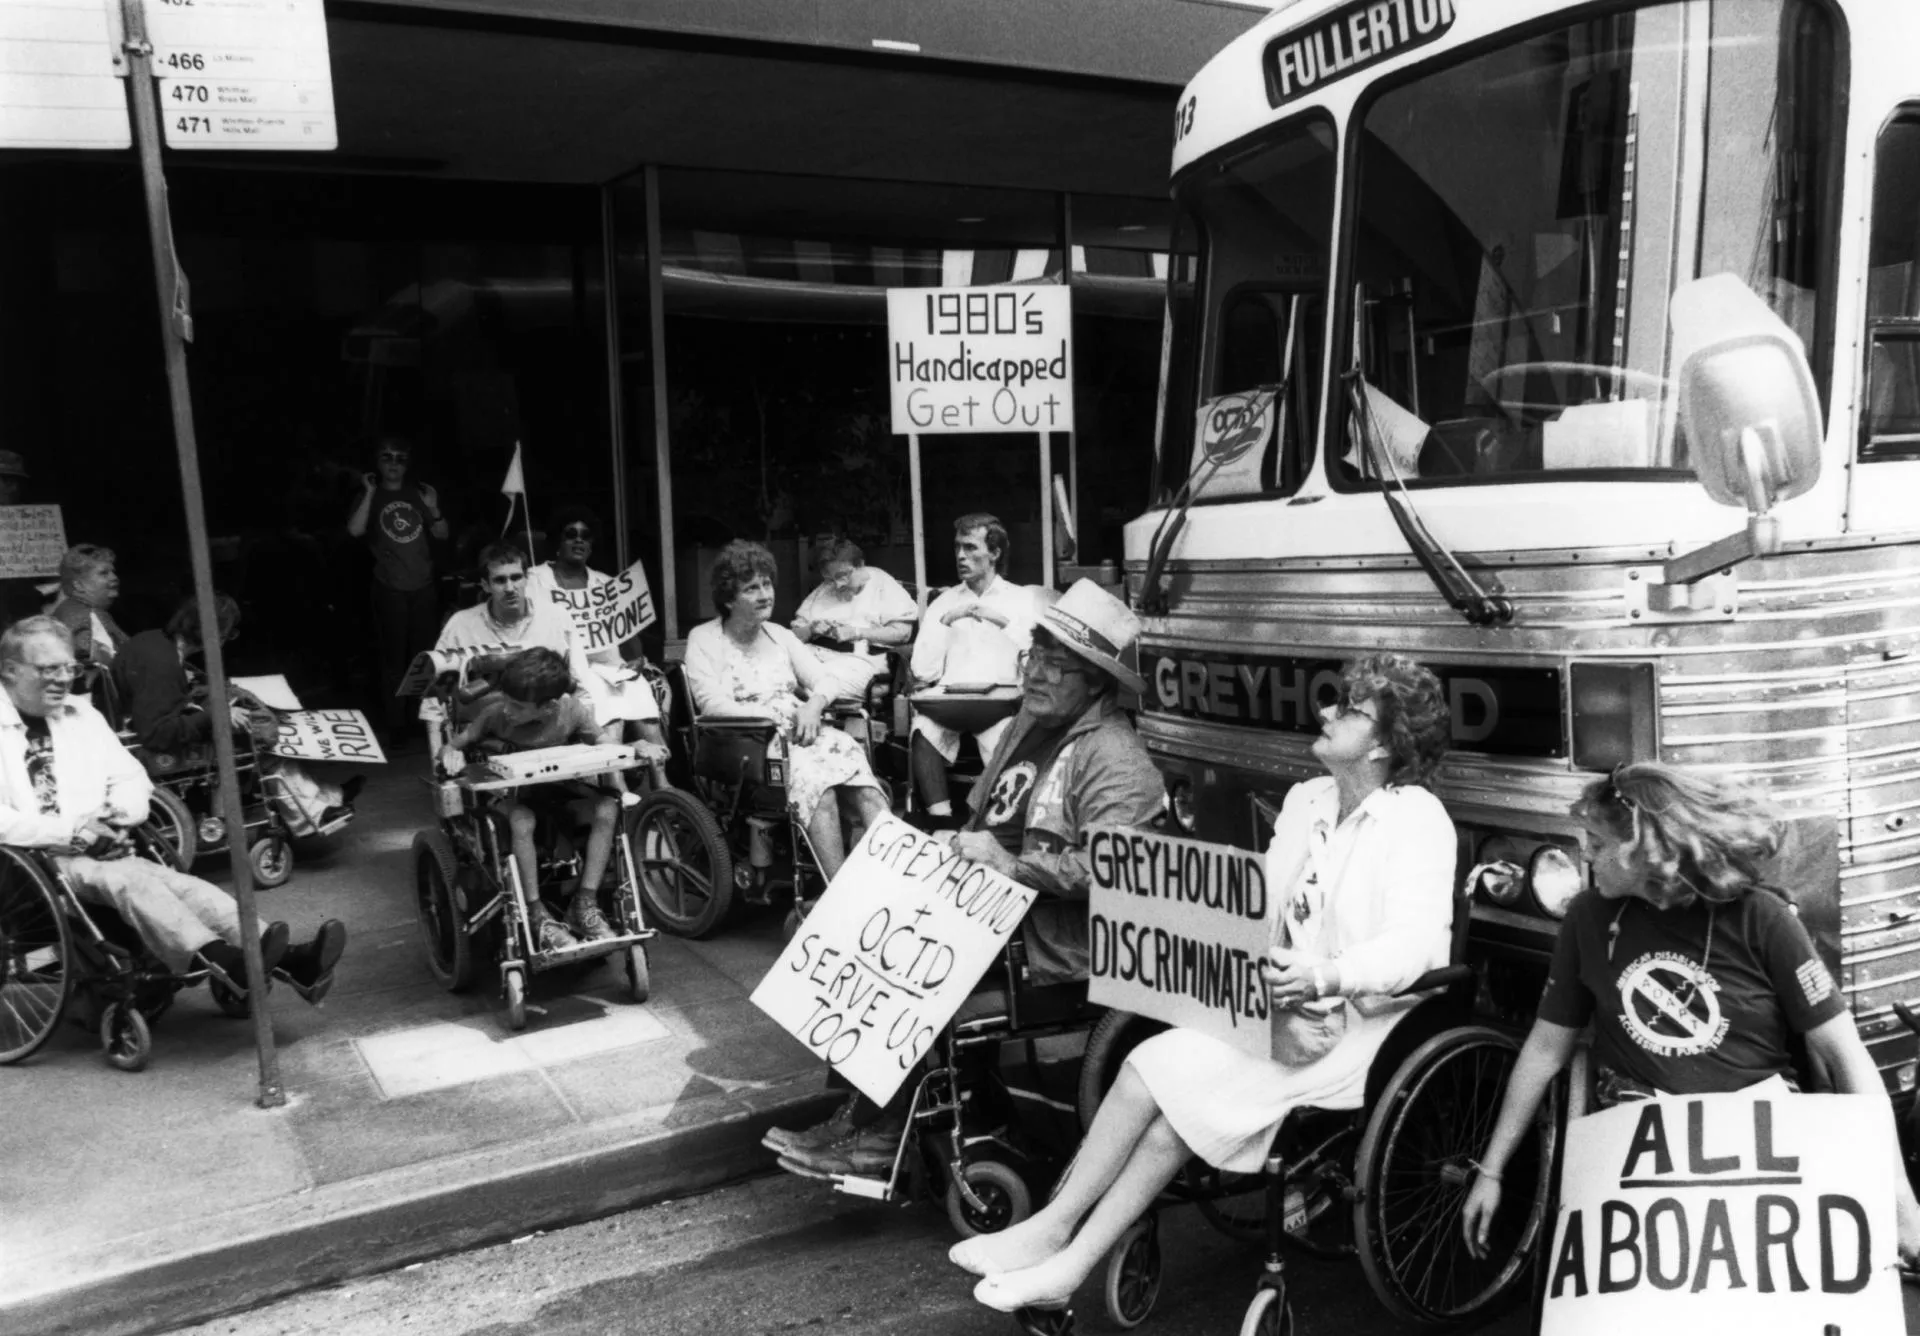 Greyhound bus depot in LA, Bill Zuke, Bill Bolte, Yvonne Nau, Sylvia Drzeweicki, Susan Gross, Ed Tessier, Ryan Duncanwood protestors with protest signs gathered on the sidewalk and front of a parked bus in the street.